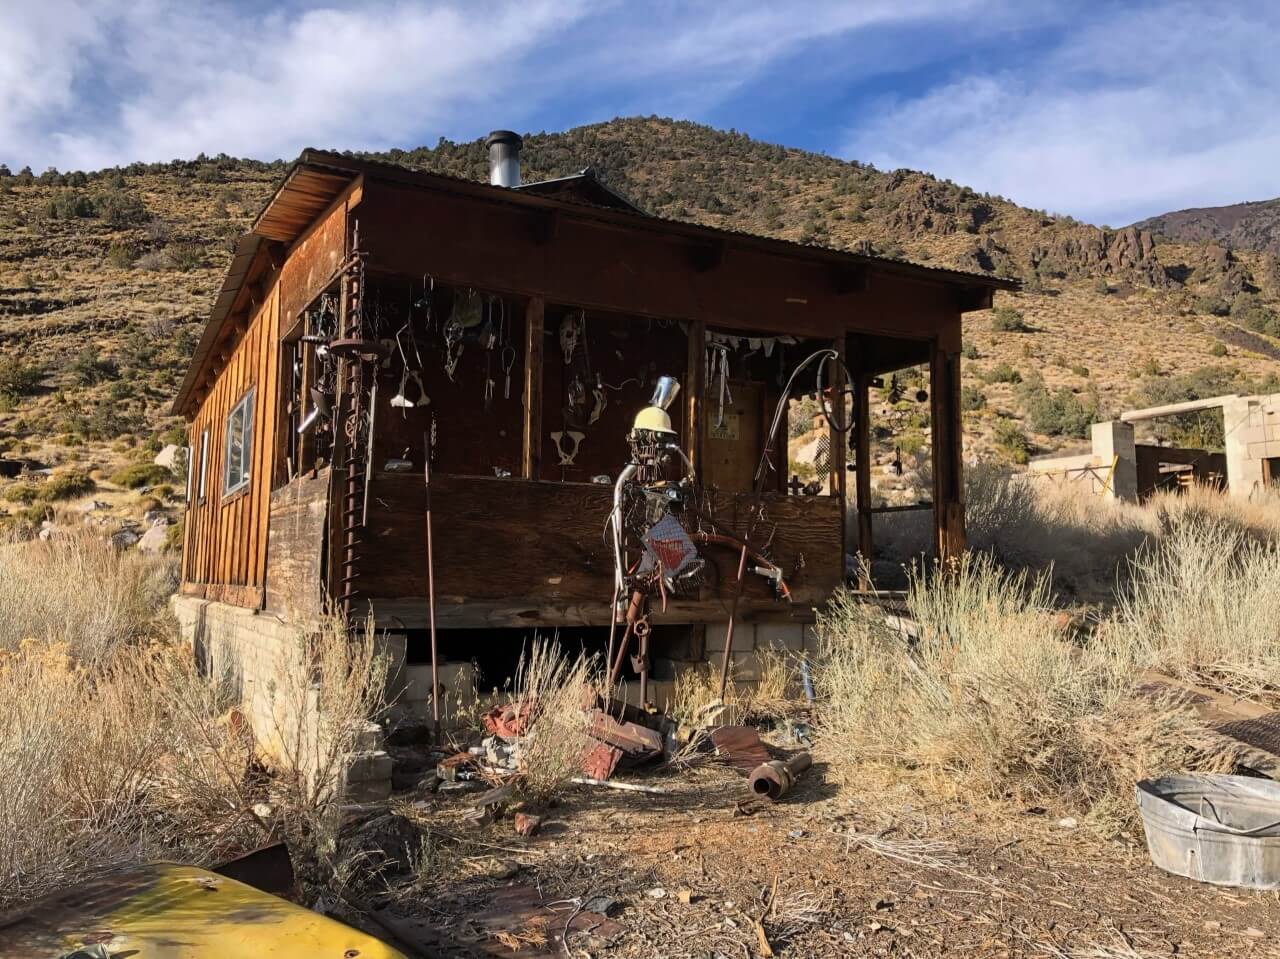 Panamint City: Camping in a Remote Ghost Town - All you need to know.